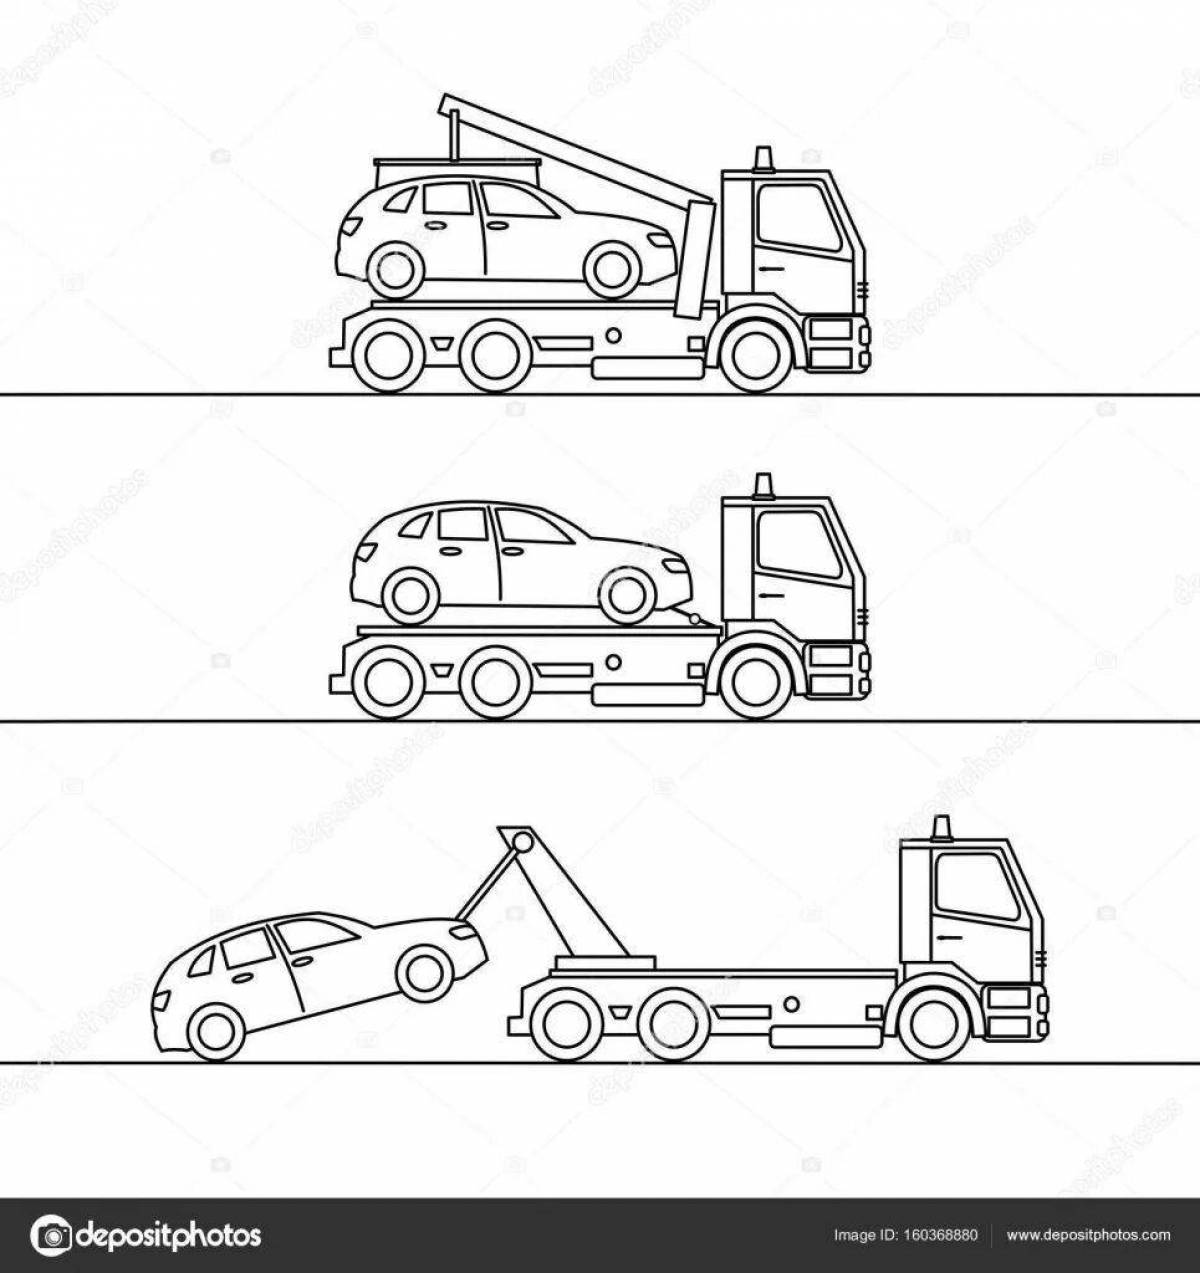 Tow truck coloring page